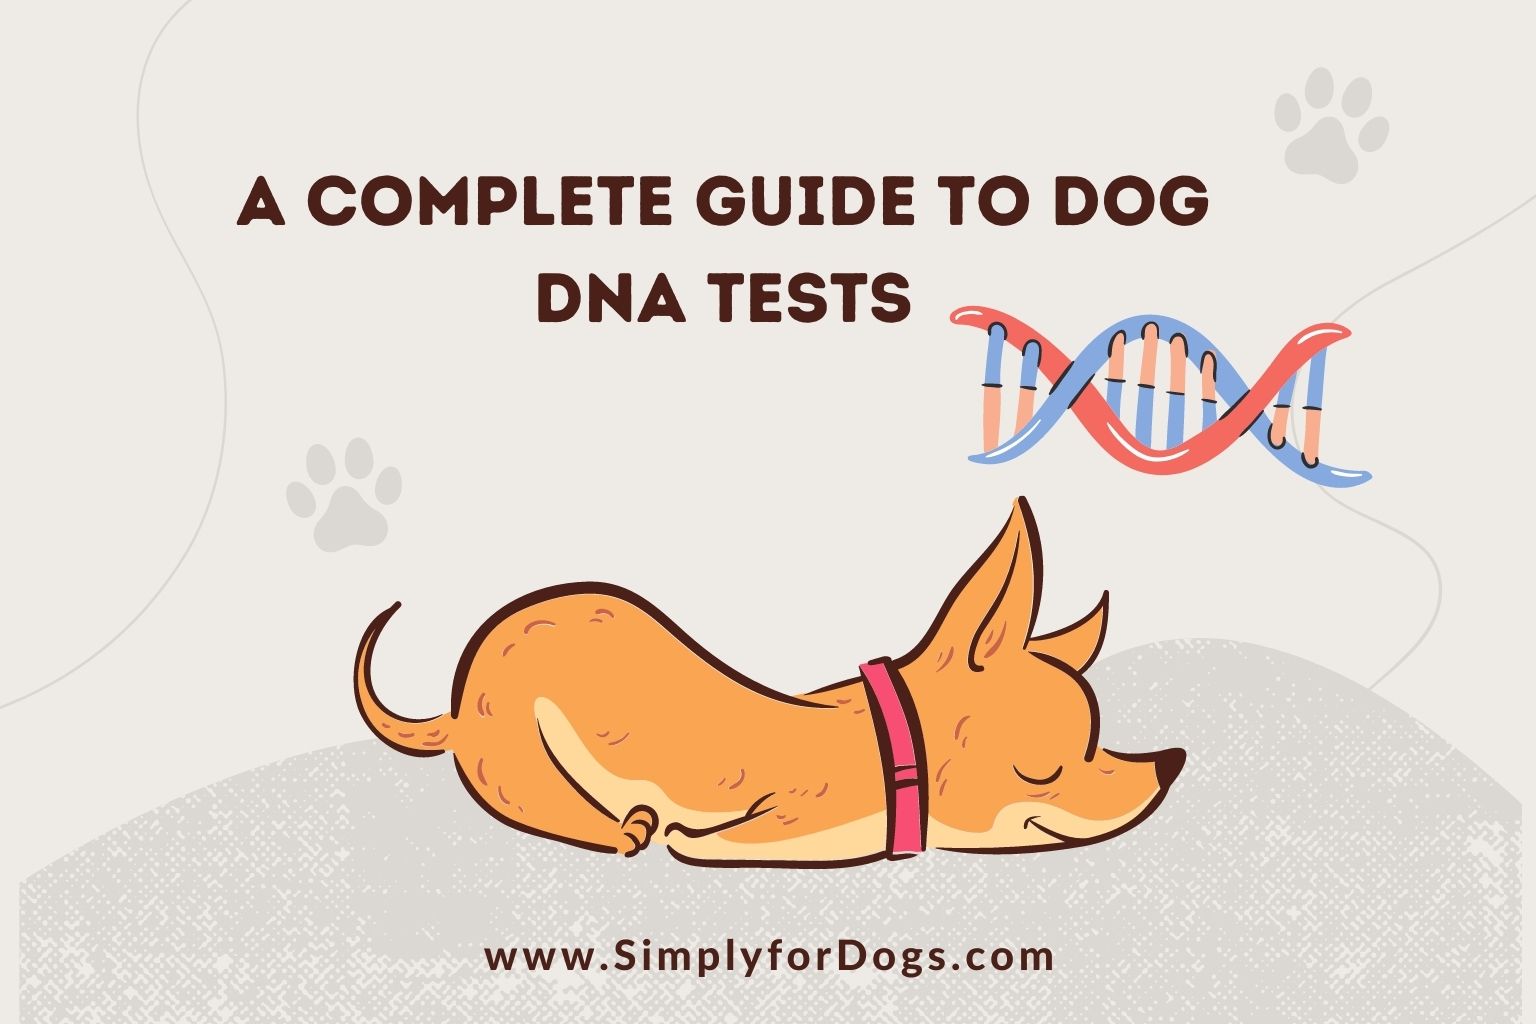 A Complete Guide to Dog DNA Tests